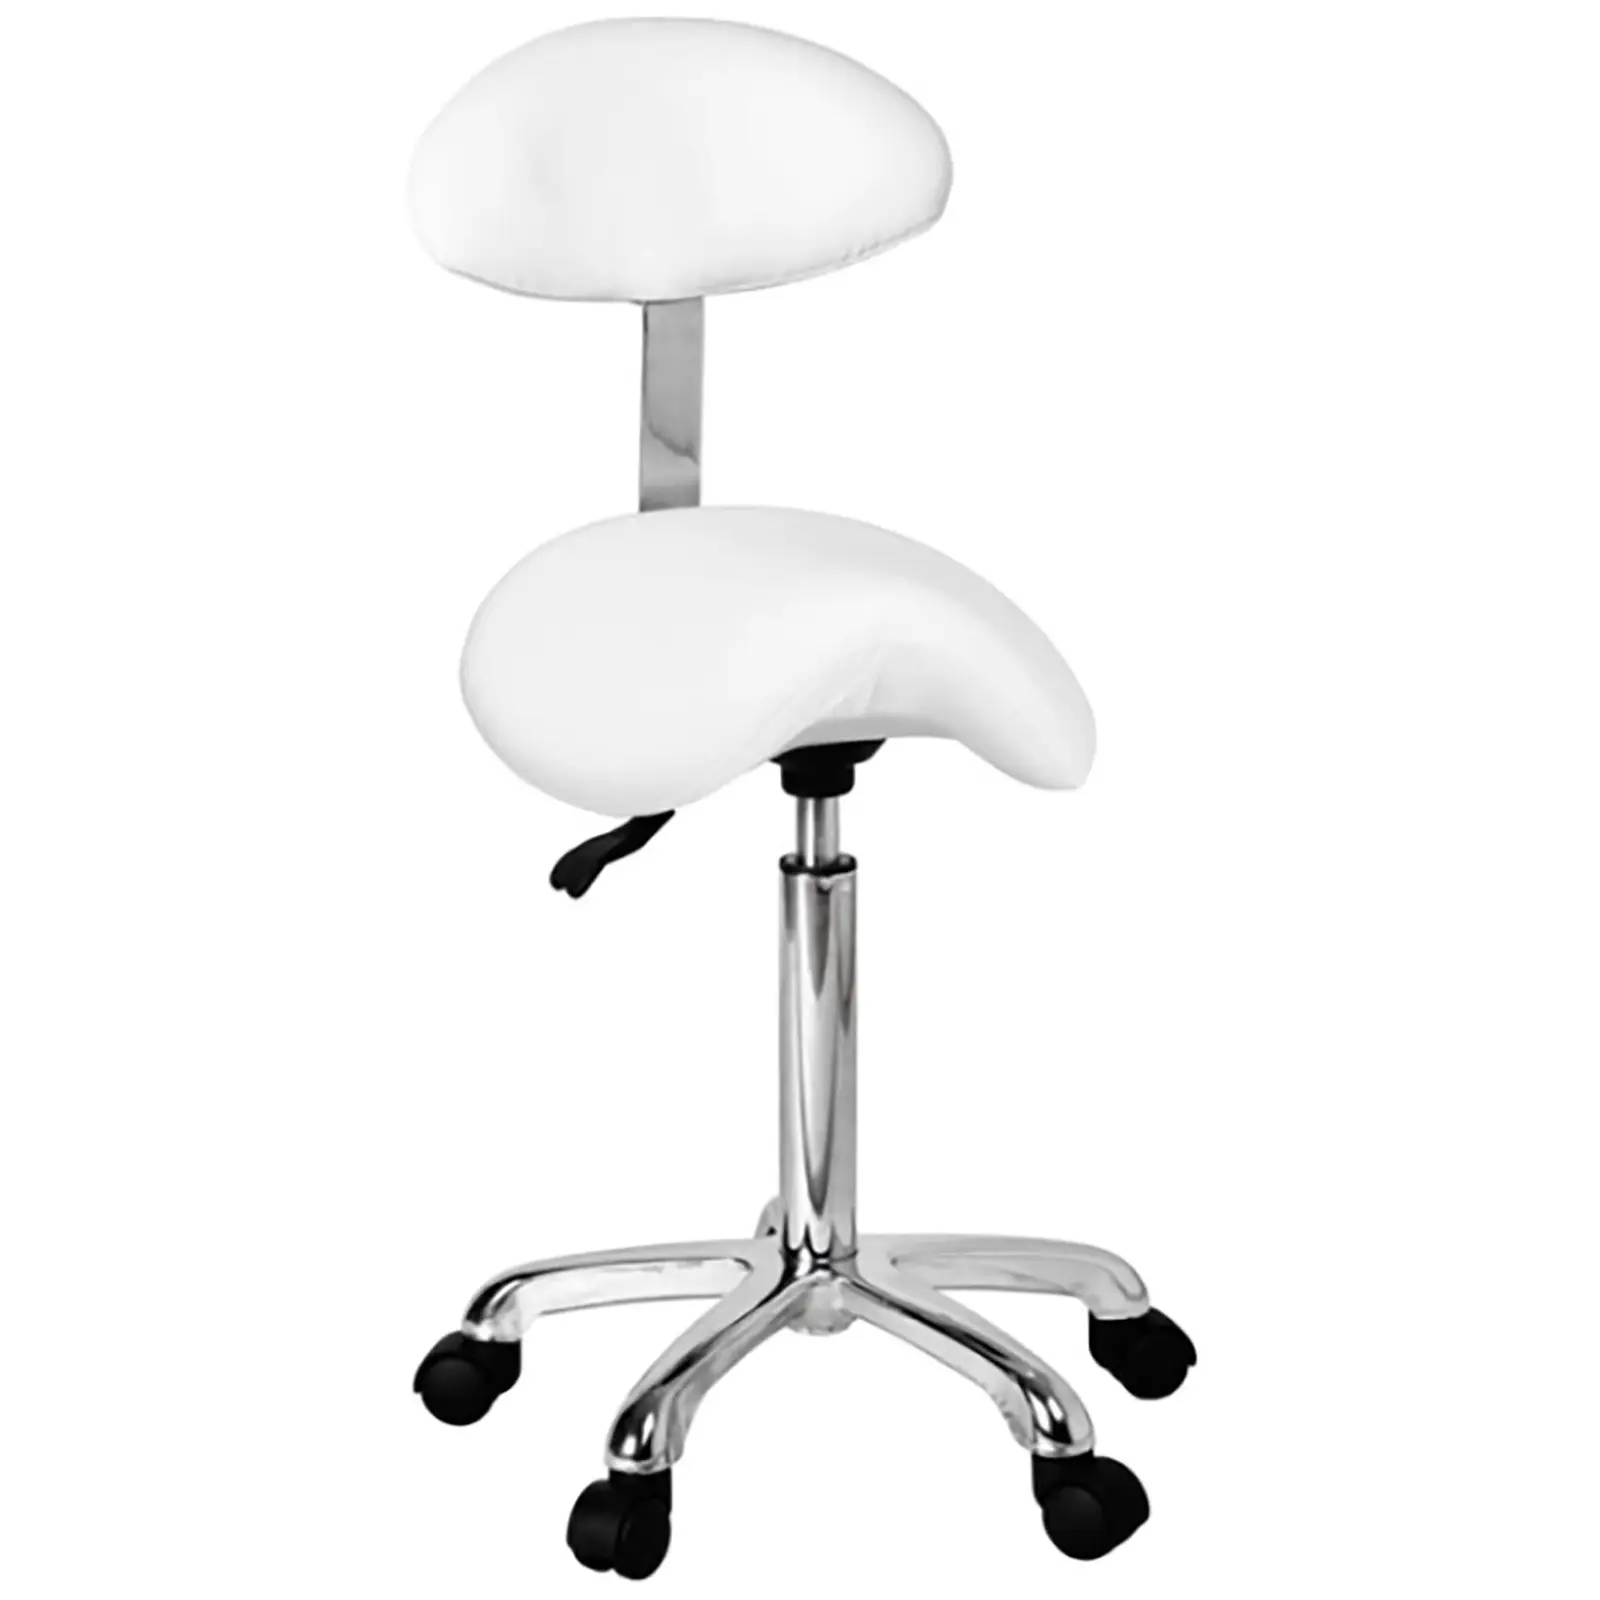 Electric Massage Table and Saddle Stool Set - 3 motors - remote control - white